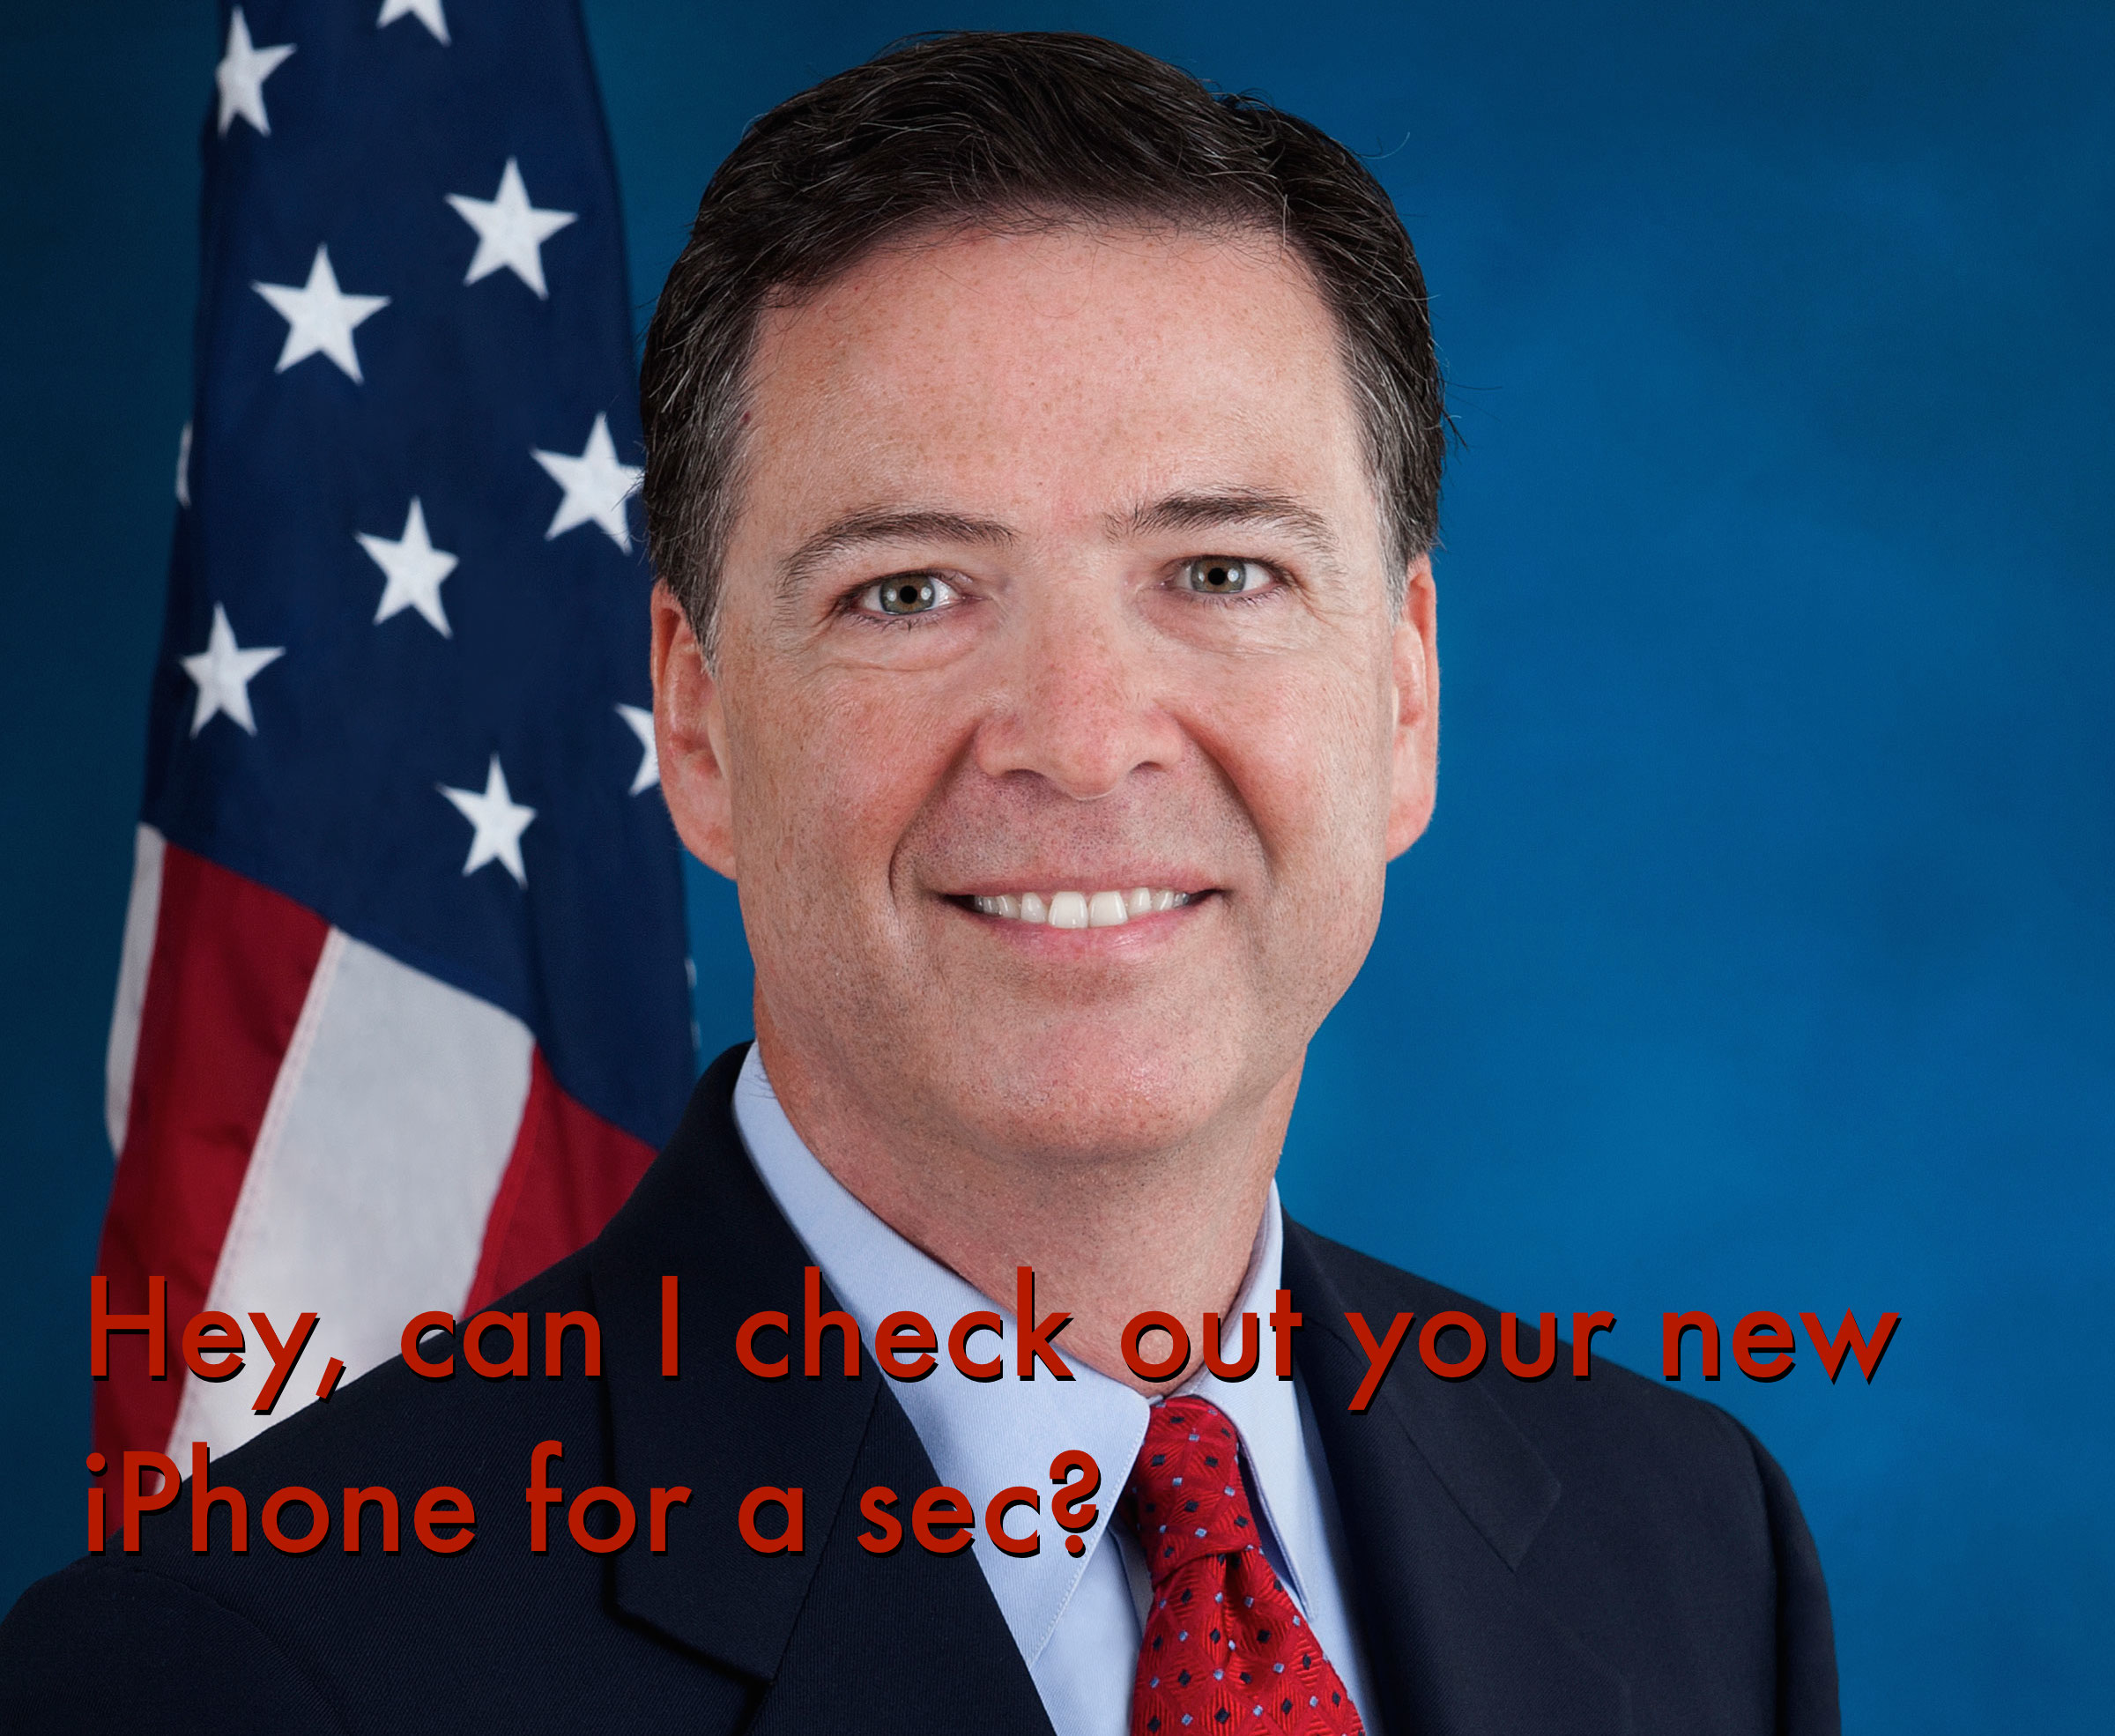 FBI Director Wants To Change Law To Allow Easier Snooping On Smartphones